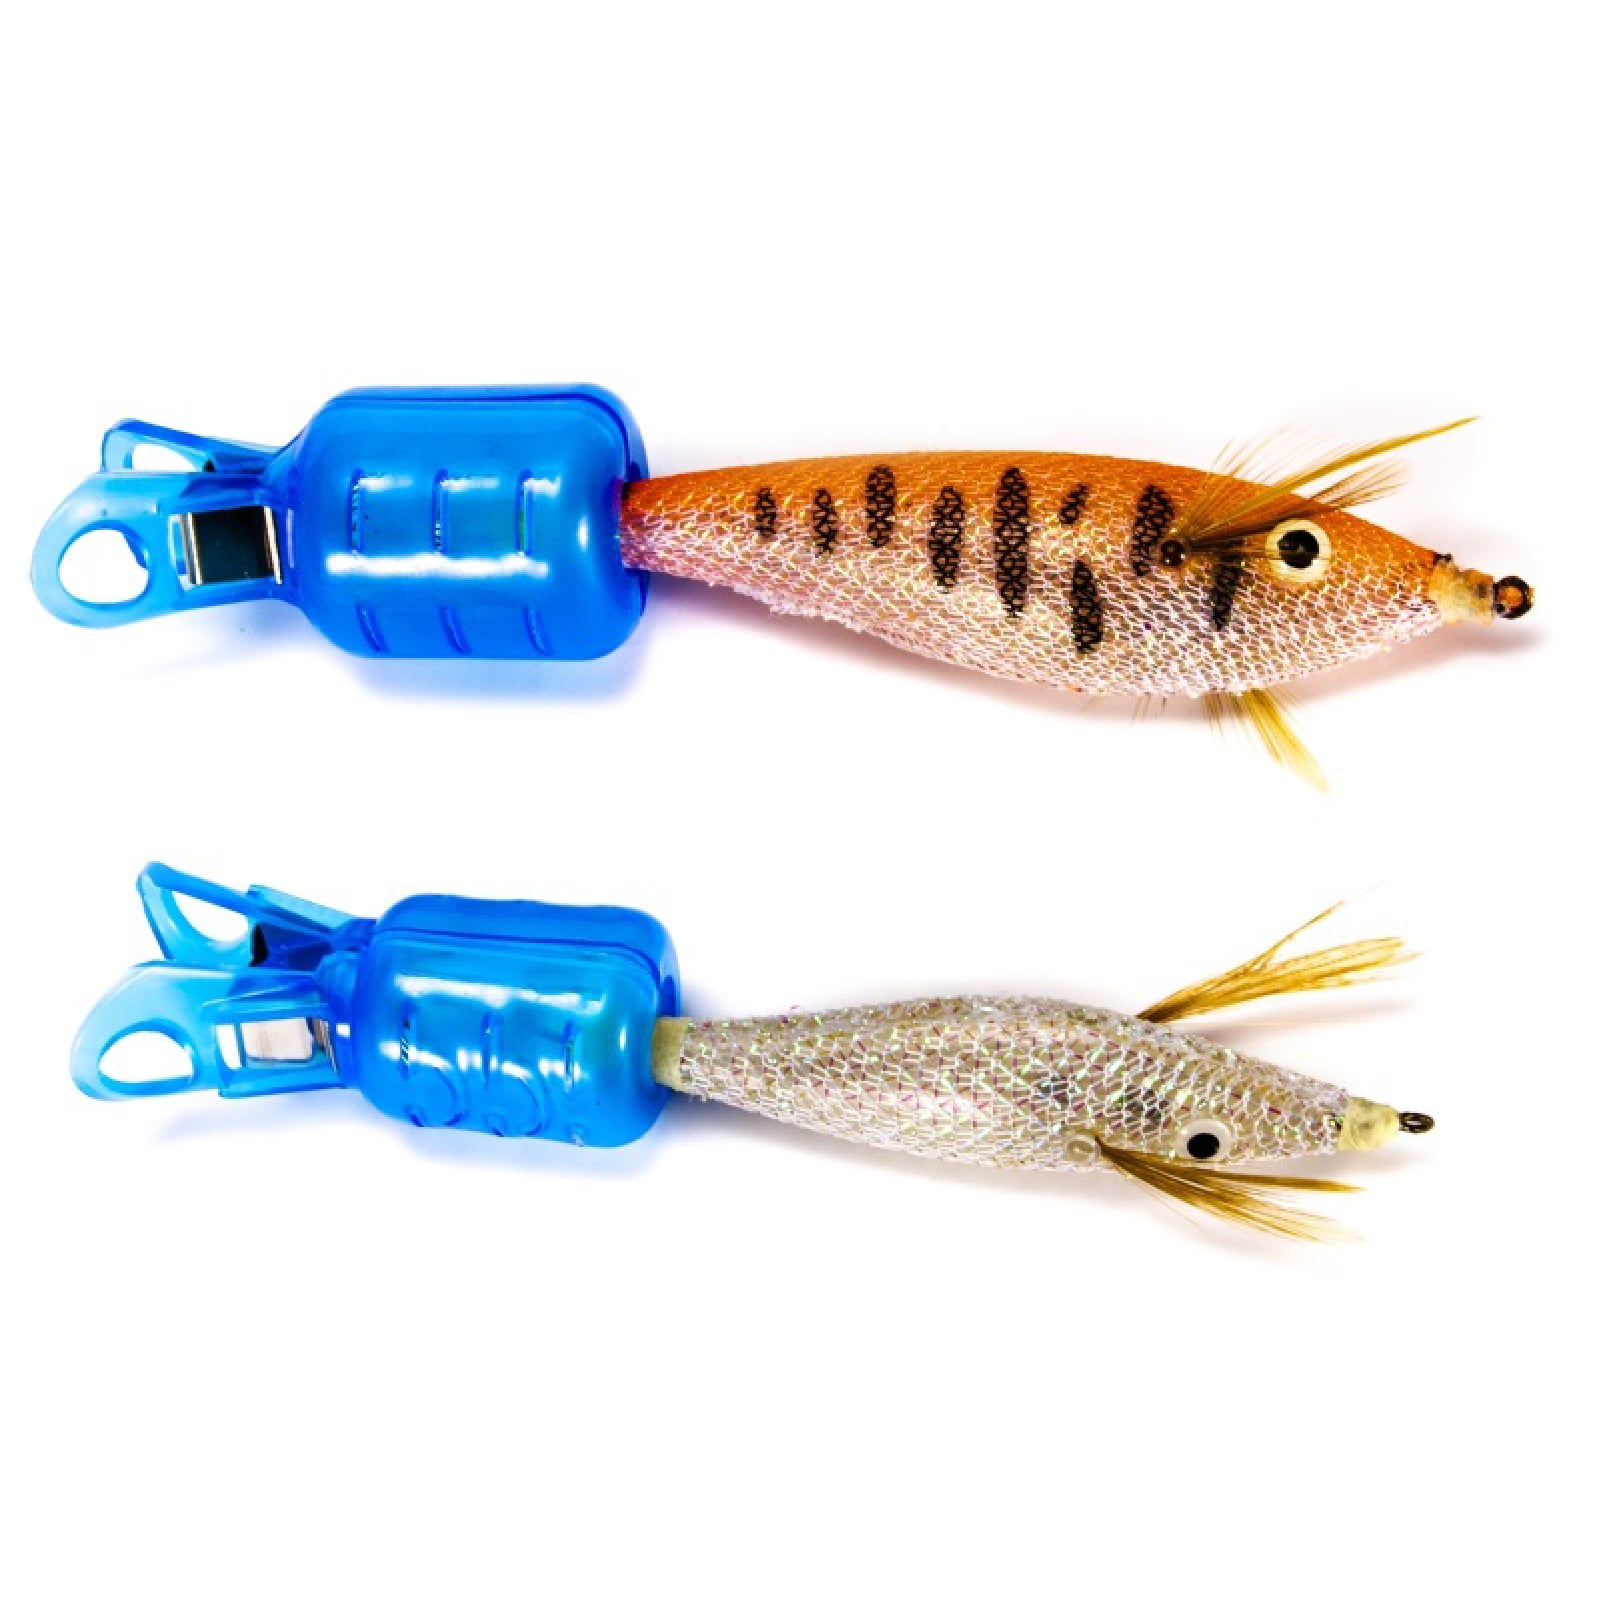 Details about   3x PVC Fishing Lure Wraps Hook Protective Covers Bait Storage Fishing Accessory 